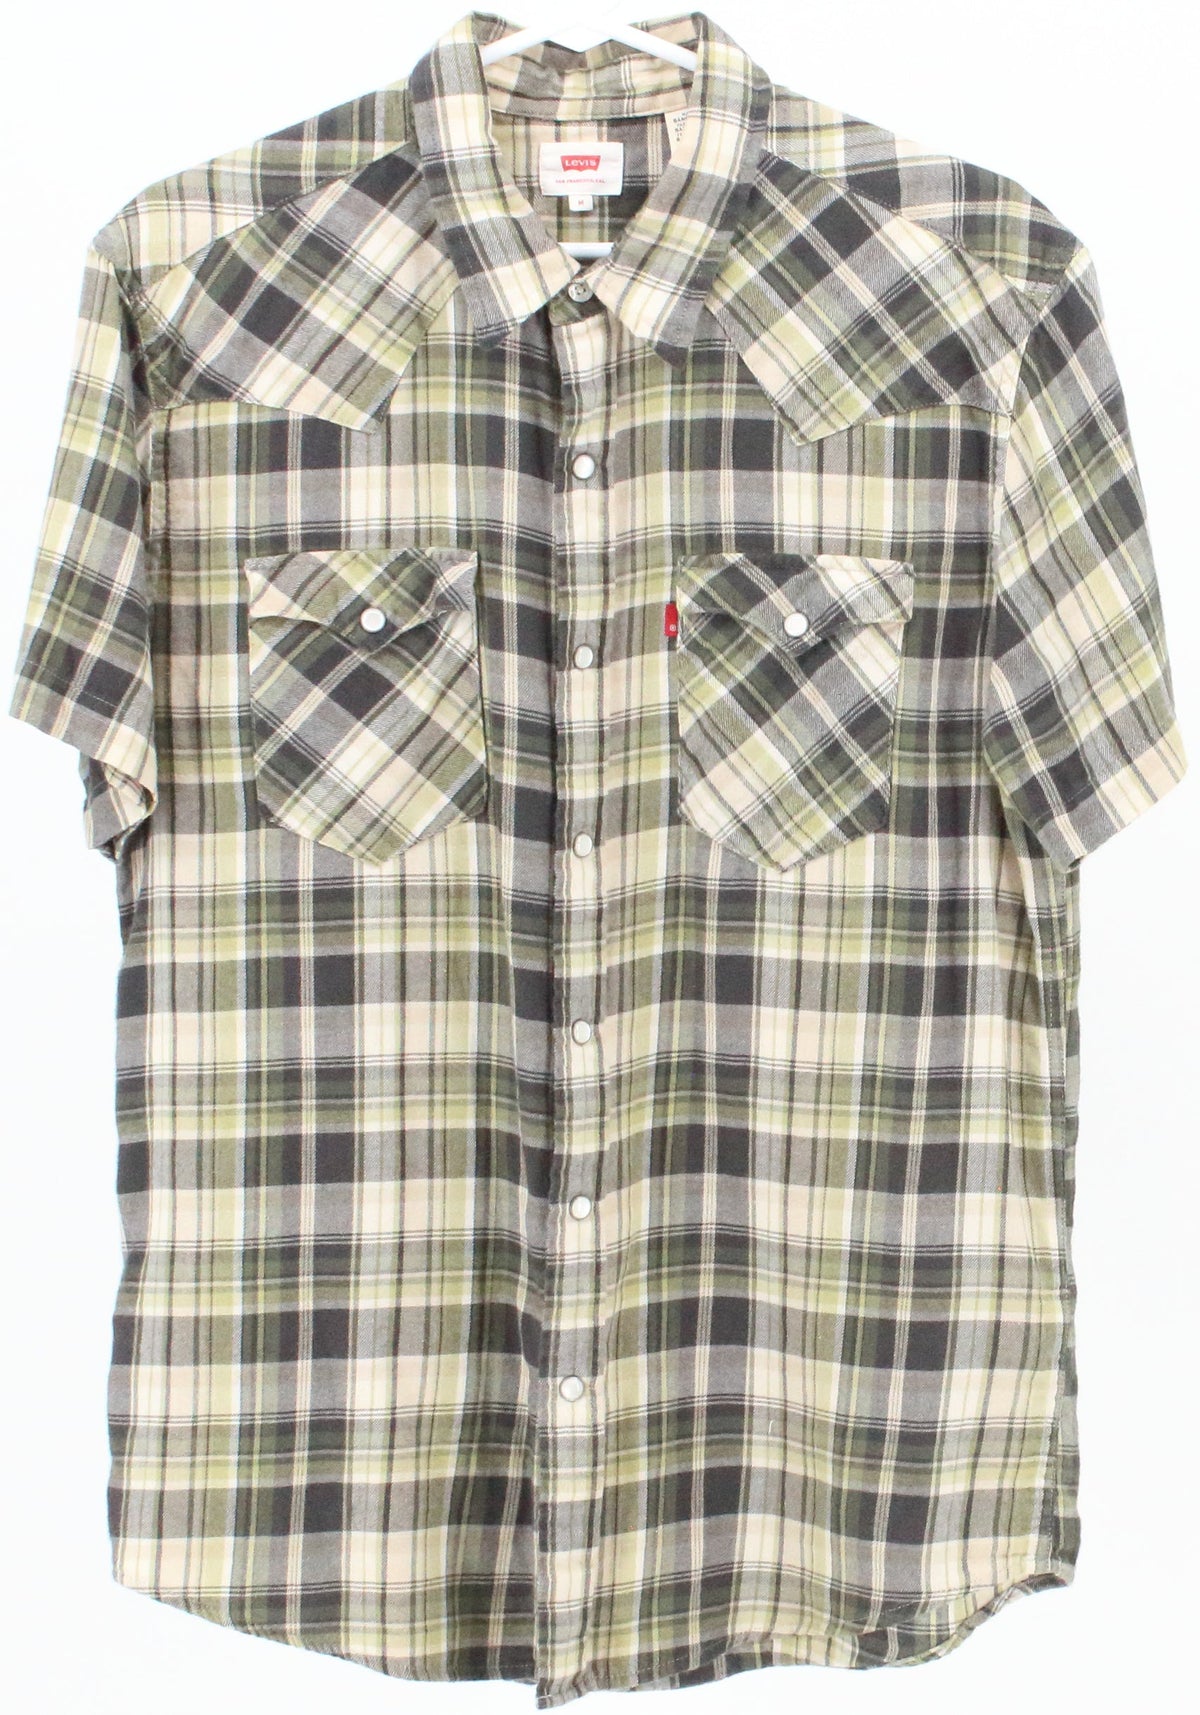 Levis Grey Green and Beige Plaid Flannel Short Sleeve Shirt